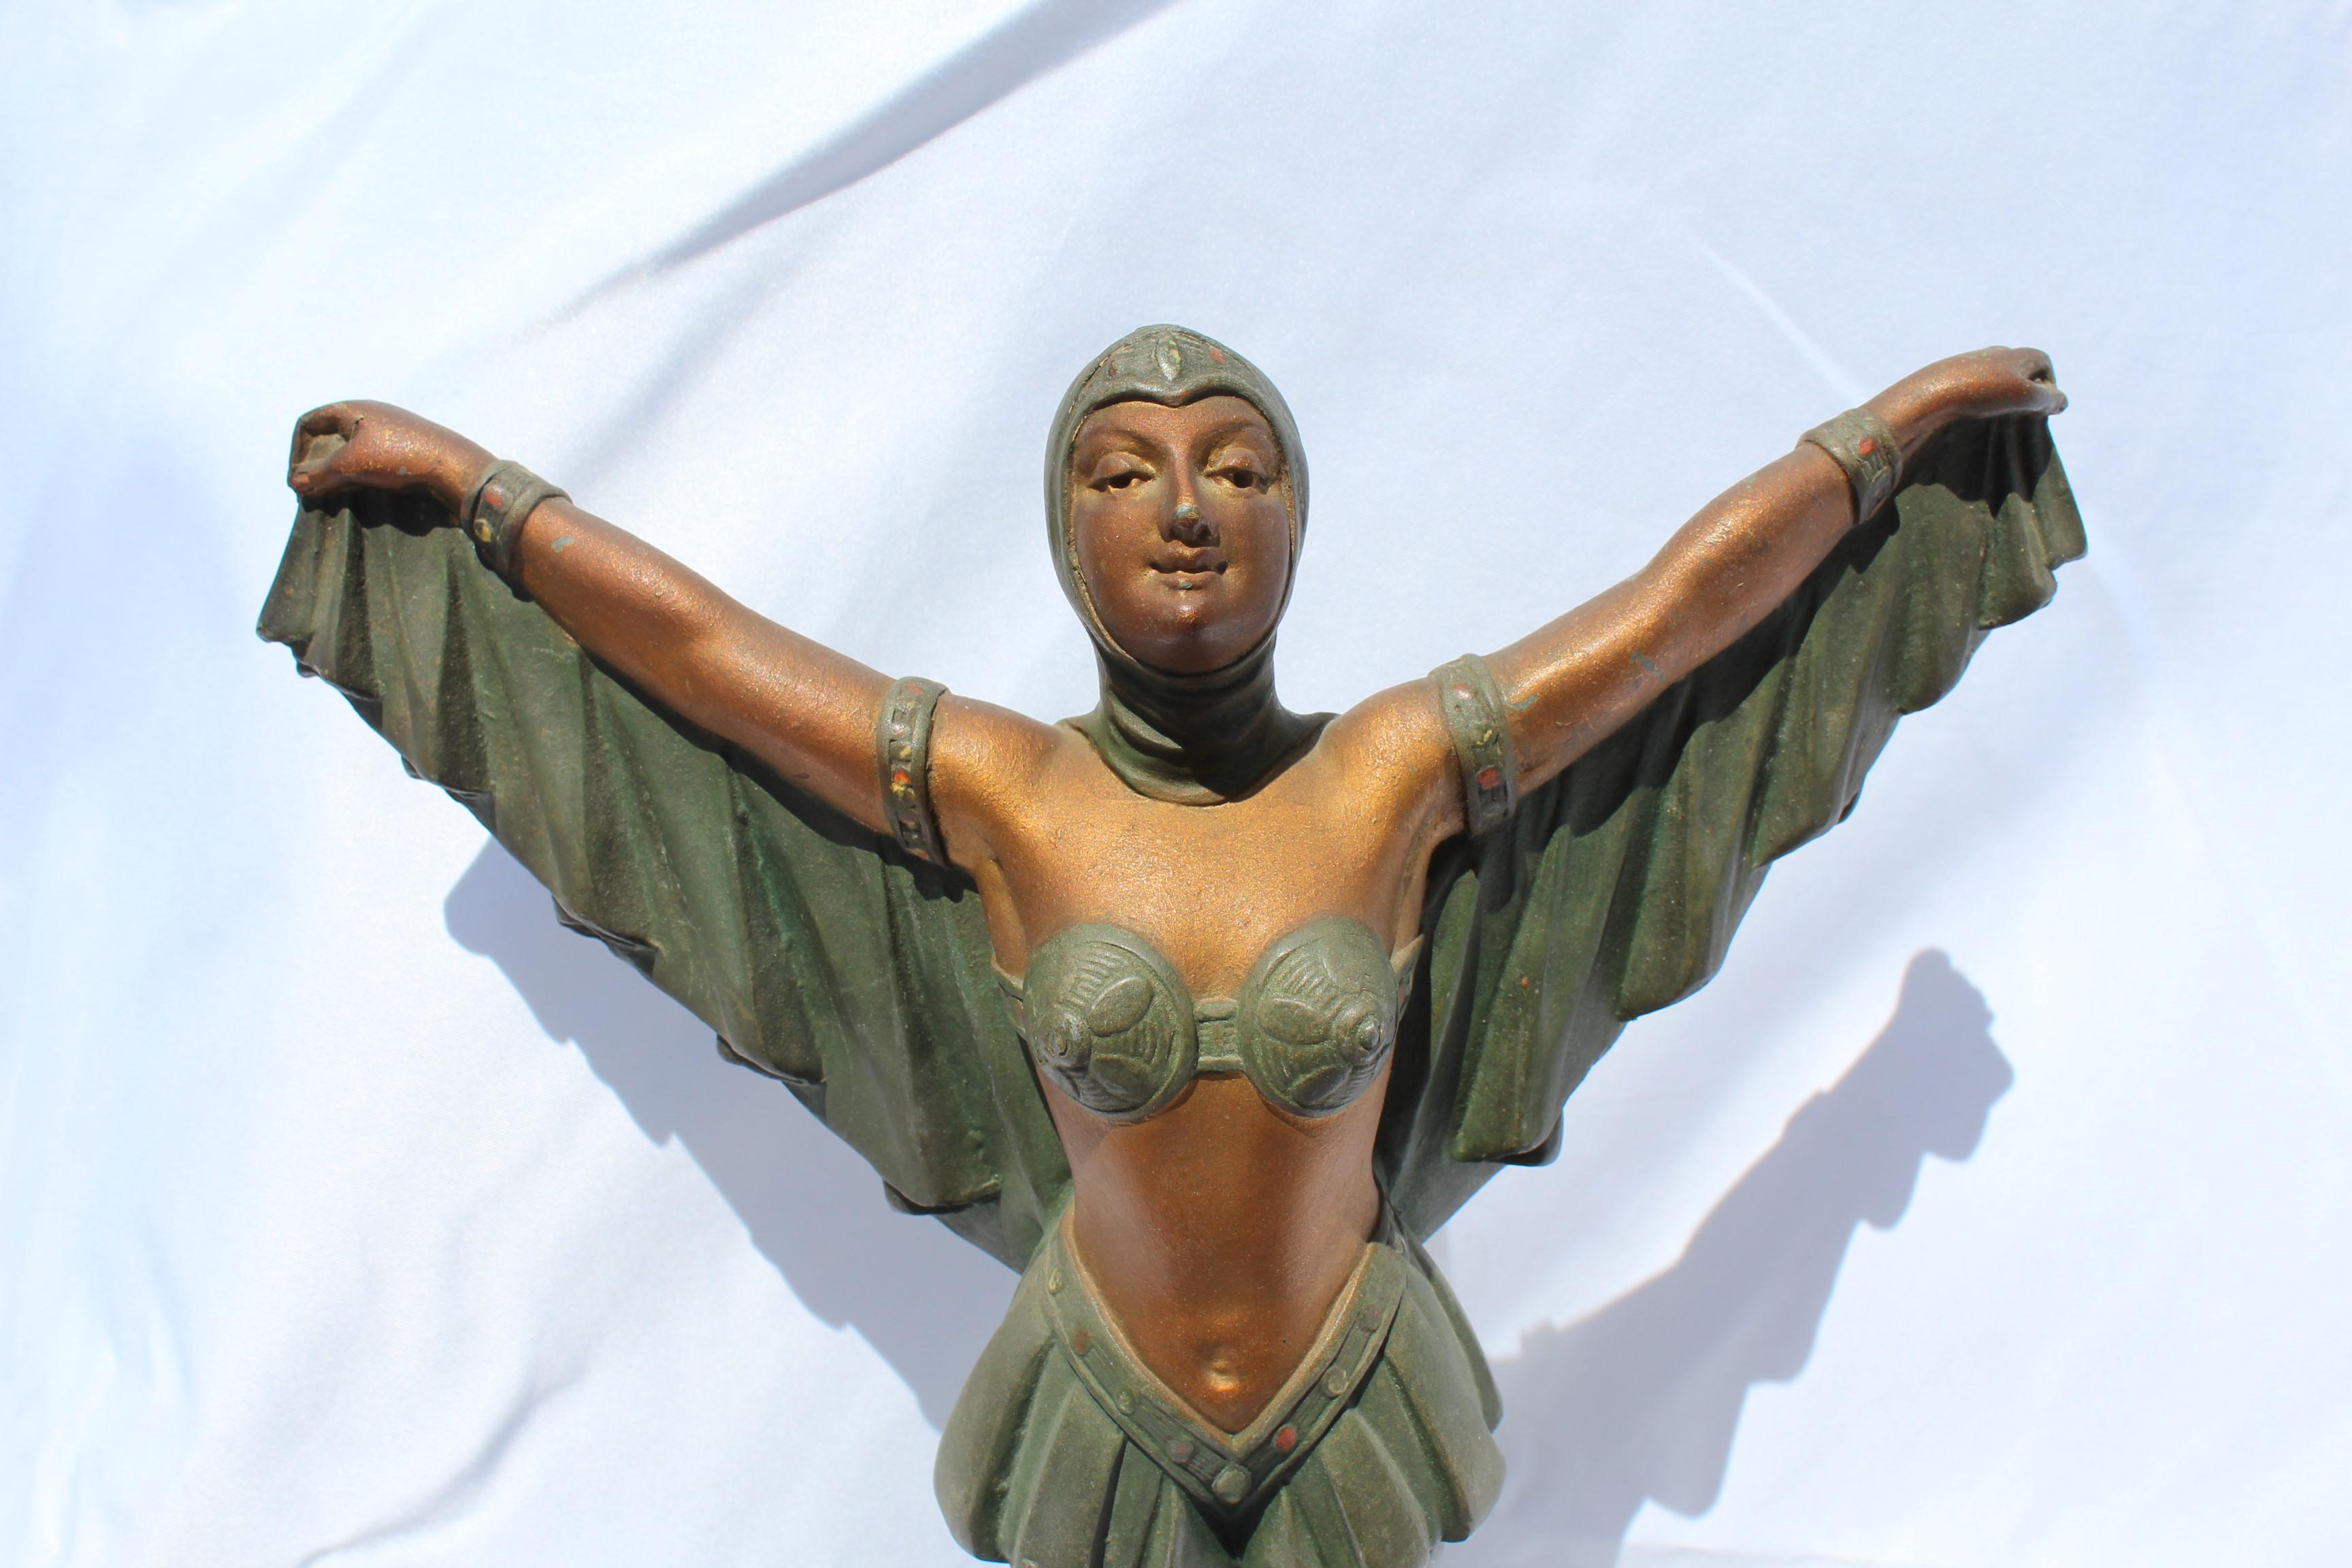 Art Deco bat girl with original patina finish. Mounted on black/fold marble base. Has the (France) casting mark on the back side of her arm. From a private collector. Measures: Height is 11 